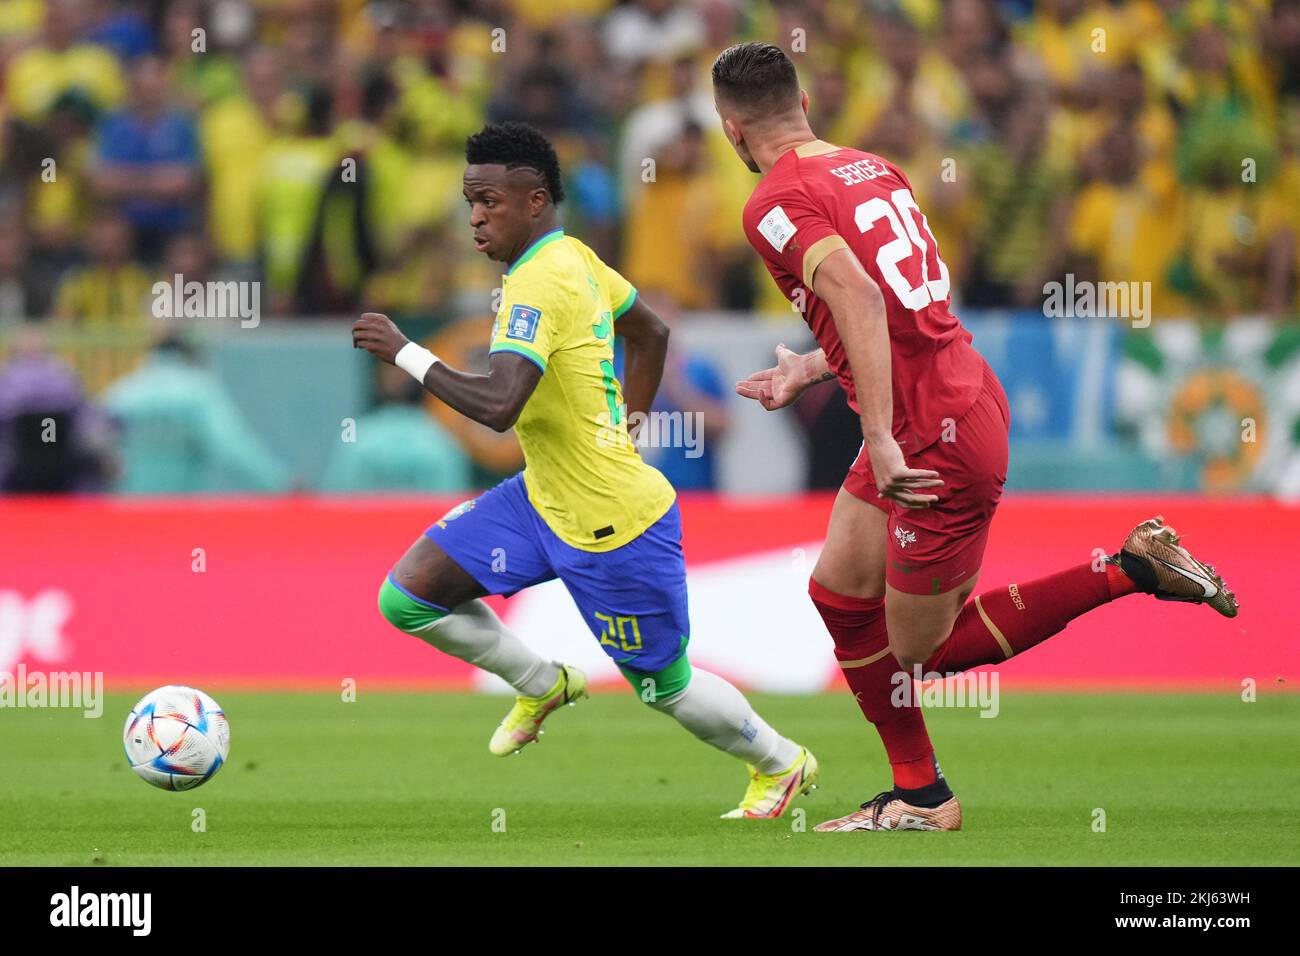 Vinicius Junior of Brazil during the FIFA World Cup Qatar 2022 match, Group G, between Brazil and Serbia played at Lusail Stadium on Nov 24, 2022 in Lusail, Qatar. (Photo by Bagu Blanco / PRESSIN) Credit: PRESSINPHOTO SPORTS AGENCY/Alamy Live News Stock Photo